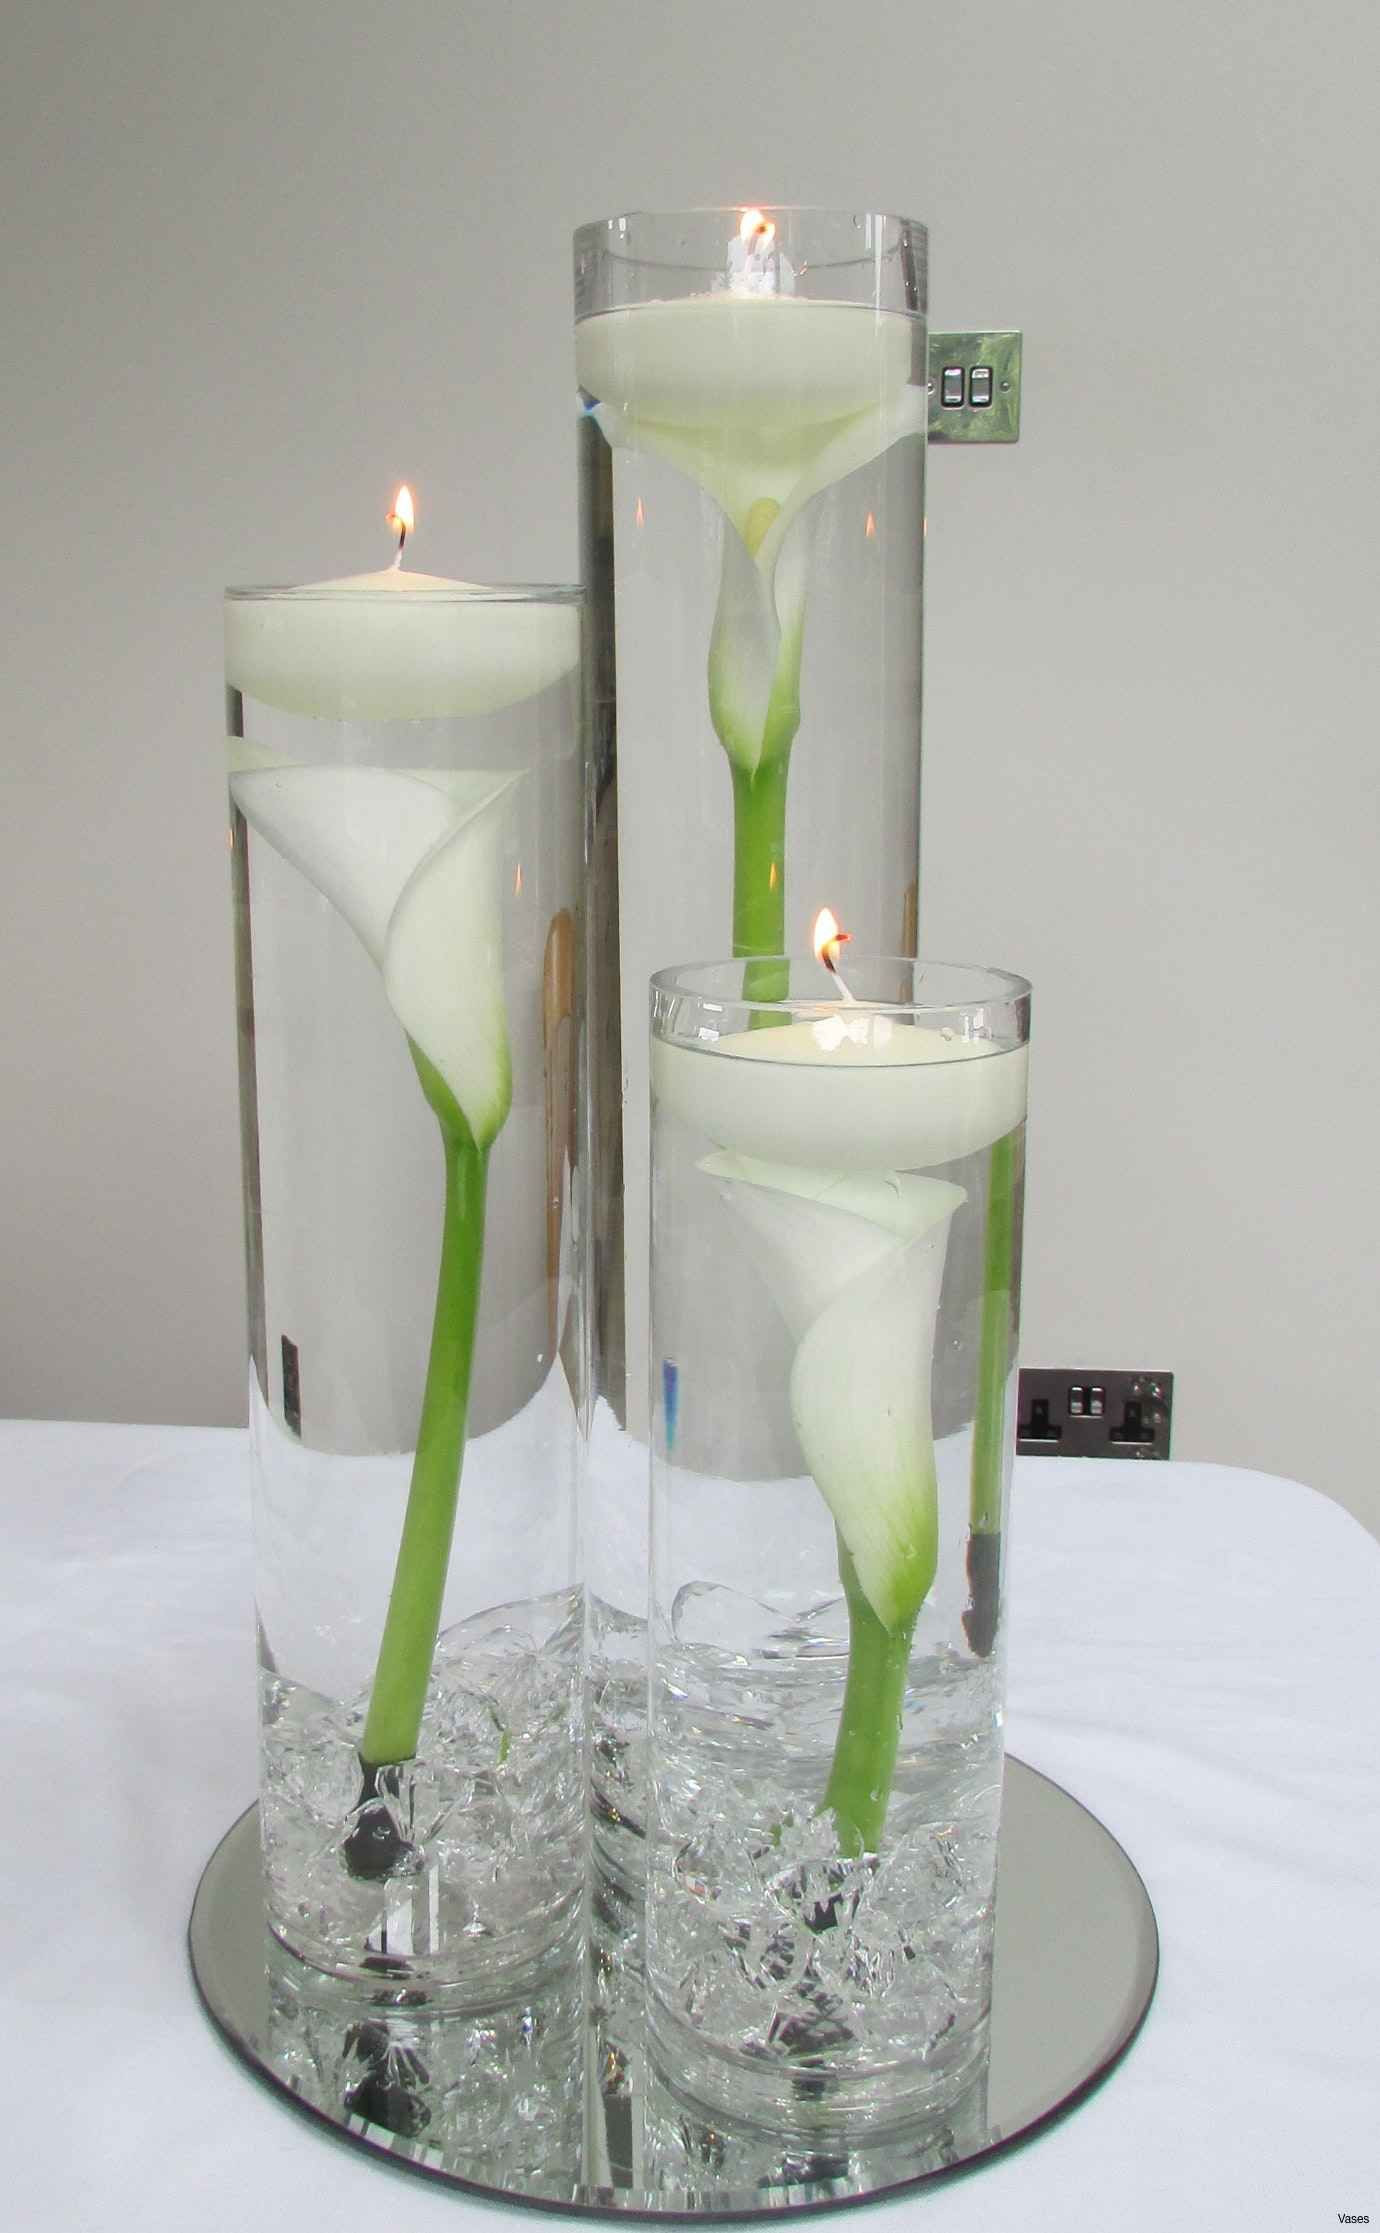 19 Nice Tall Glass Wedding Vases 2024 free download tall glass wedding vases of gold mercury glass vases beautiful vases floating candle vase set for gold mercury glass vases beautiful vases floating candle vase set glass holdersi 0d centerpi